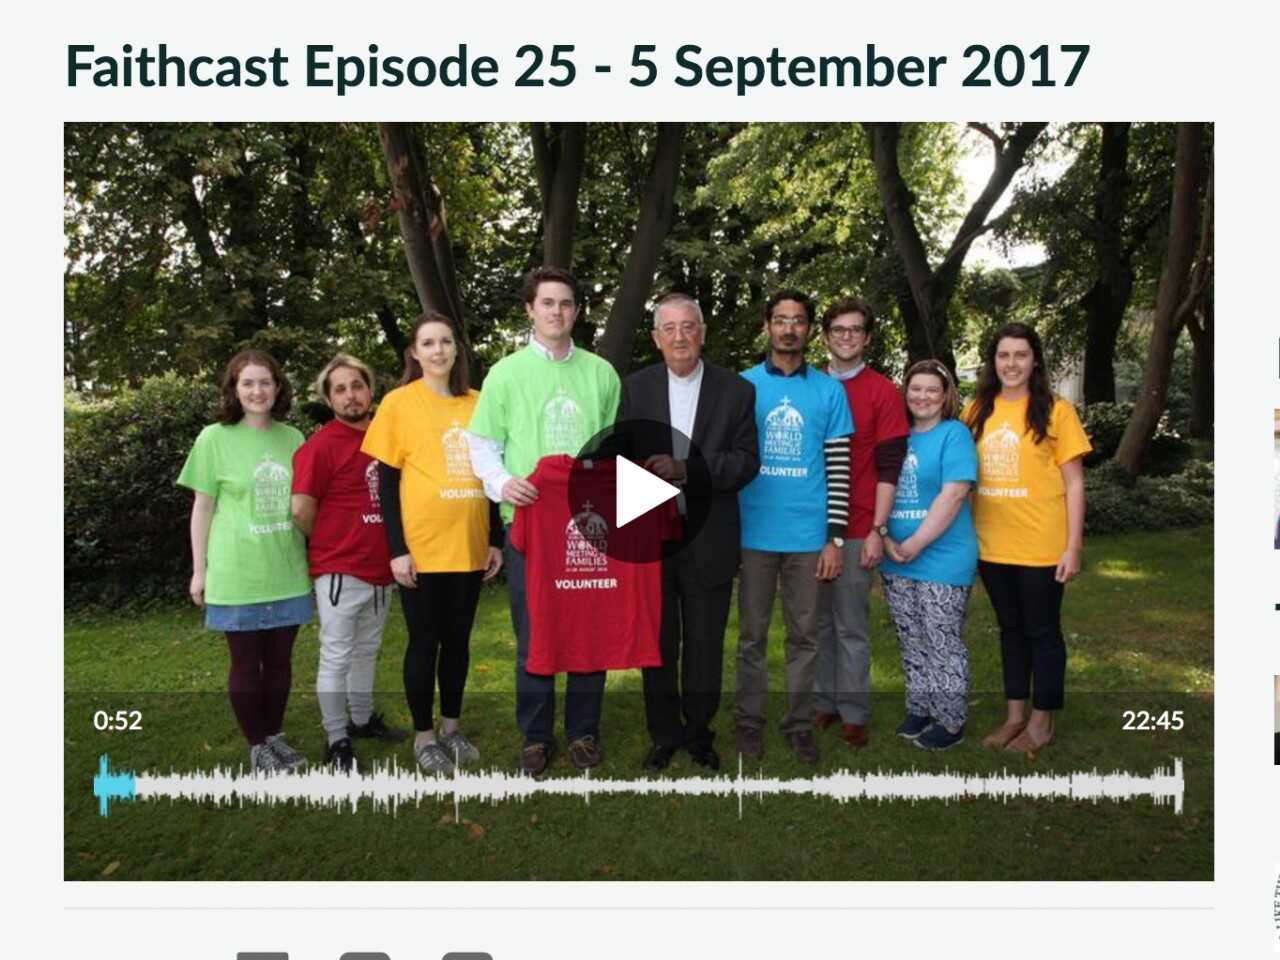 Episode 25 of 'Faithcast': the weekly podcast from catholicnews.ie